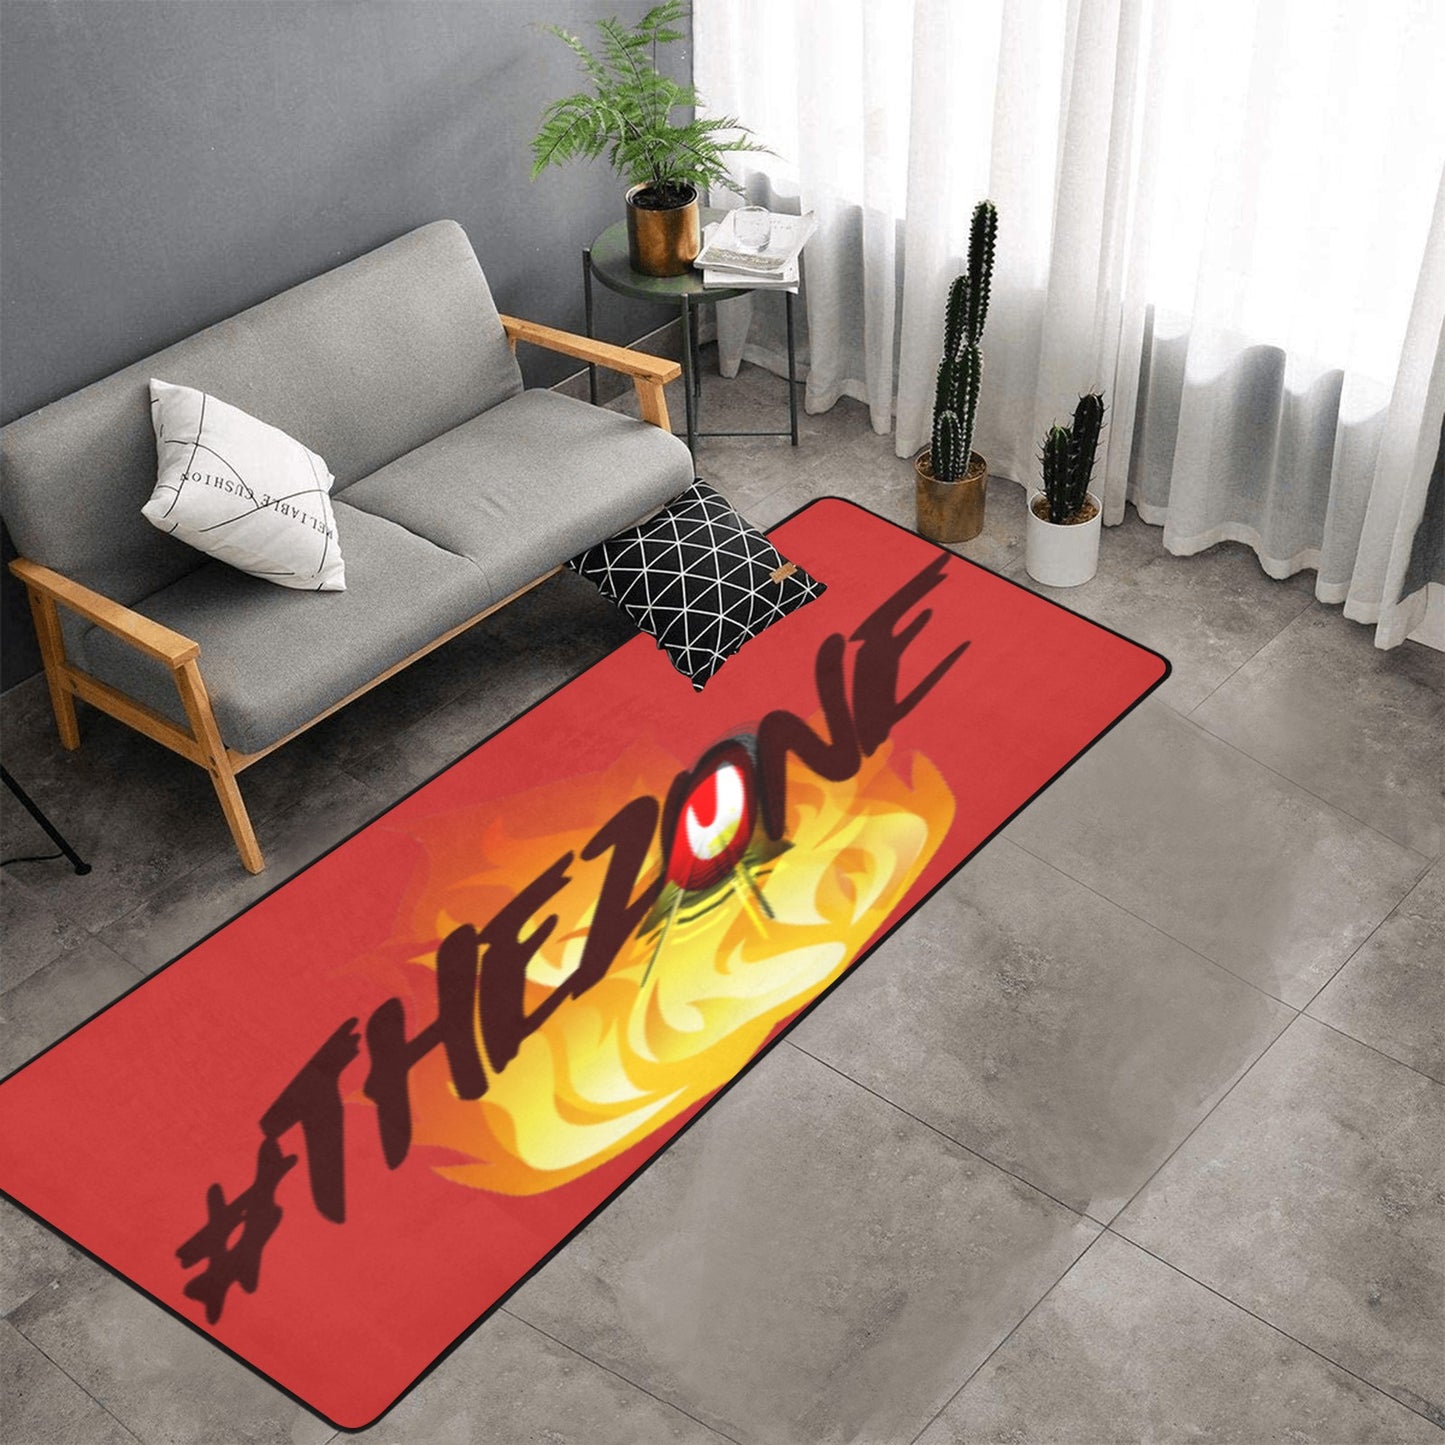 fz zone area rug one size / fz rug - red area rug with black binding  10'x3'3''